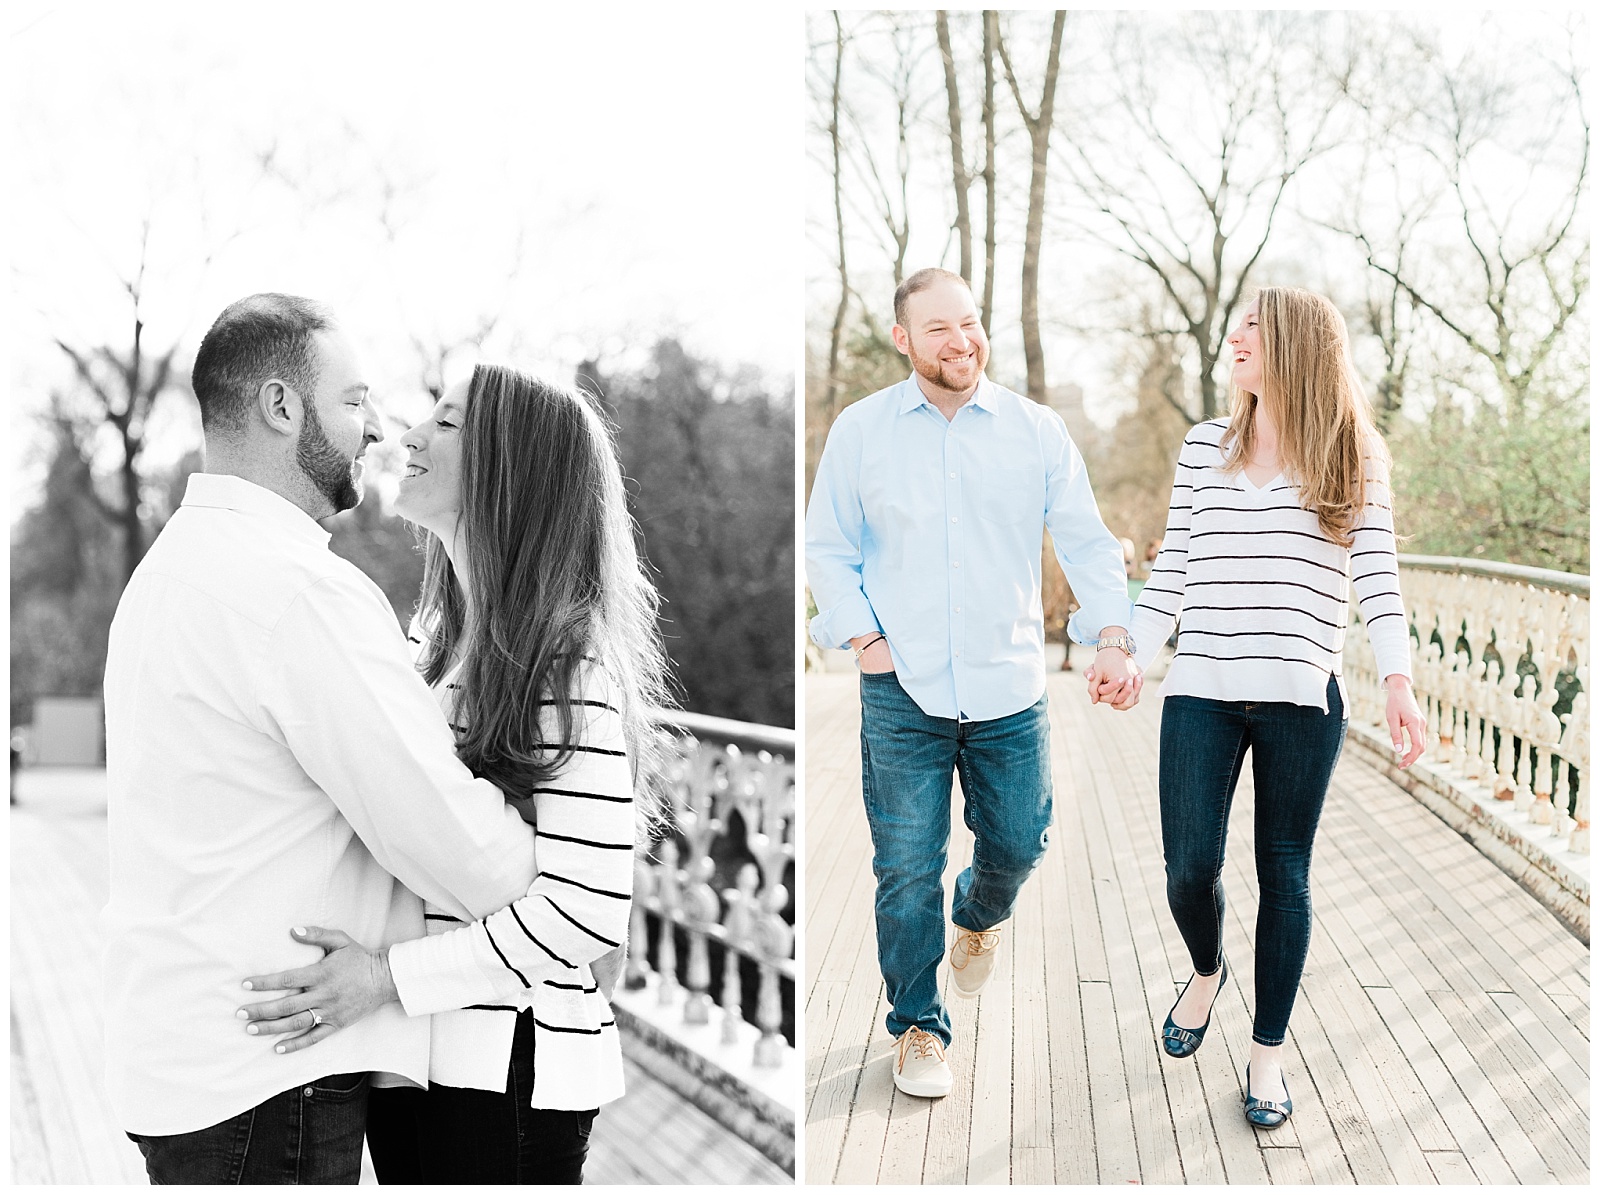 Central Park, NYC engagement session, springtime, wedding photographer, New York, candid